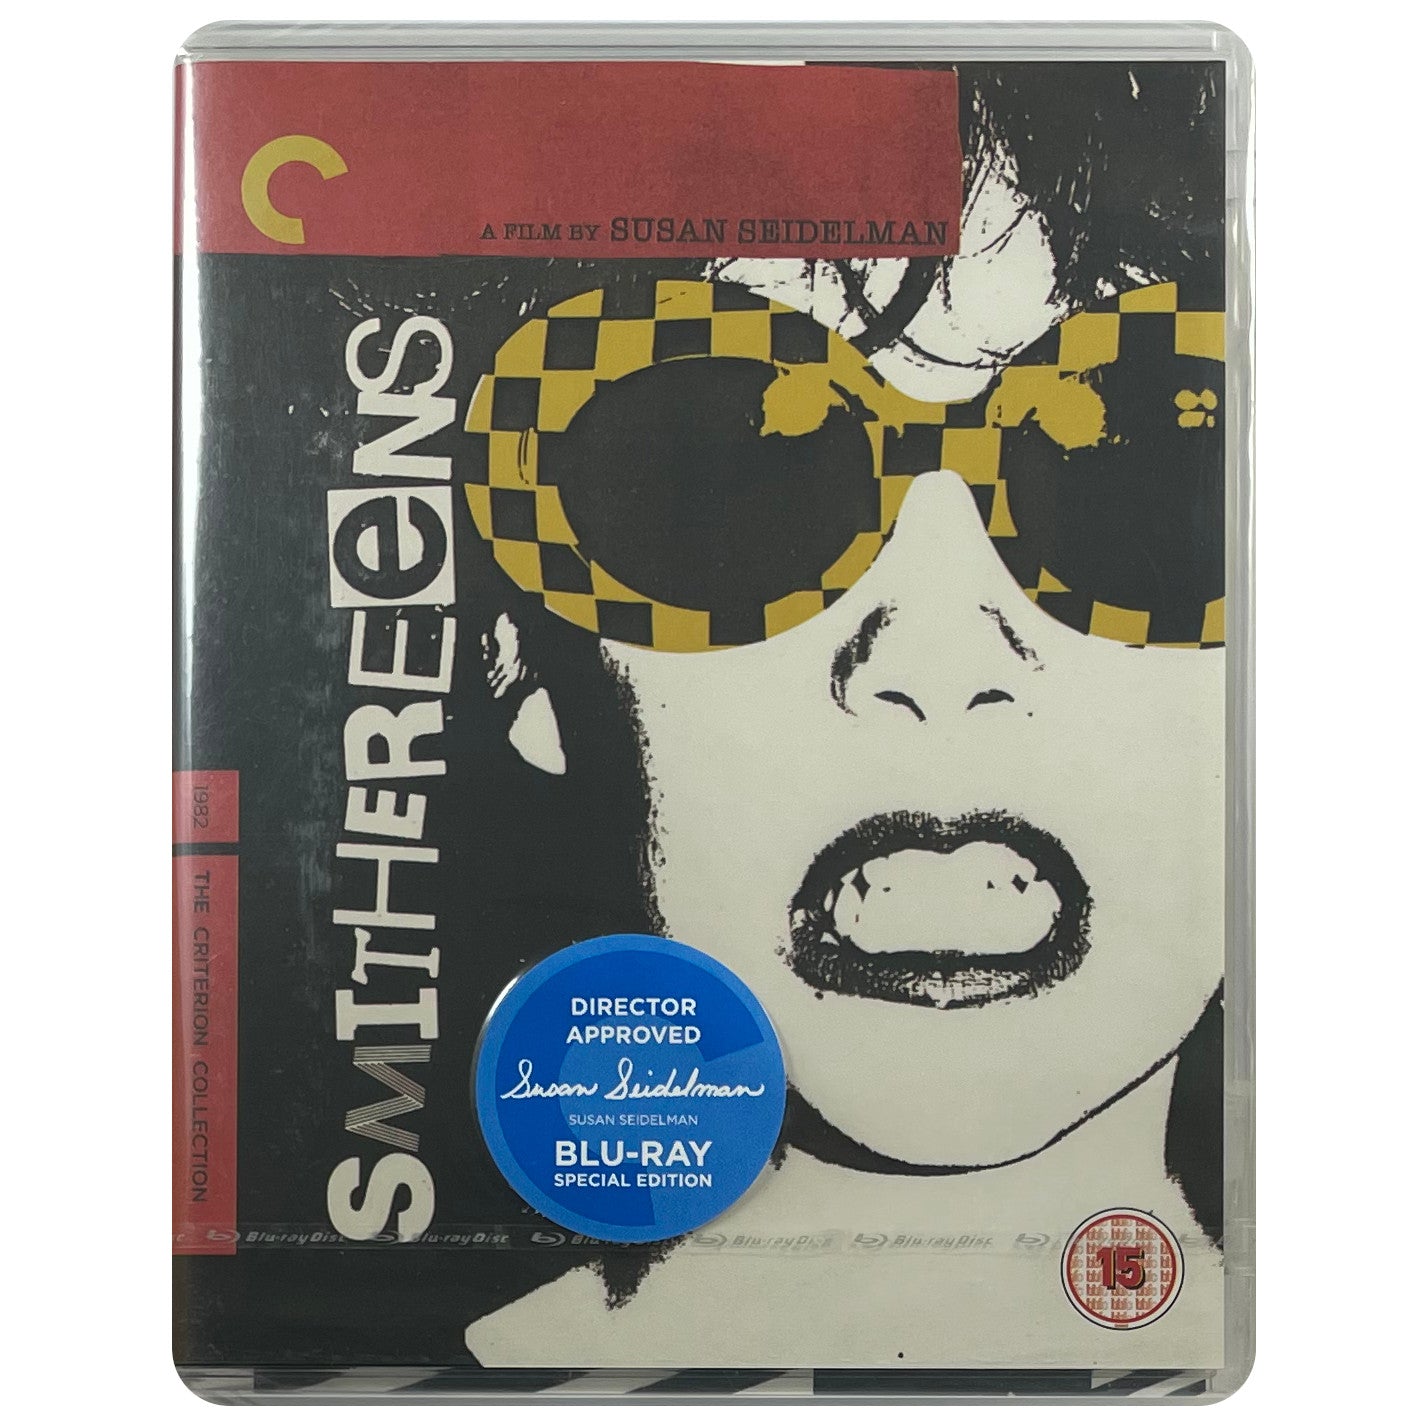 Smithereens (Criterion Collection) Blu-Ray